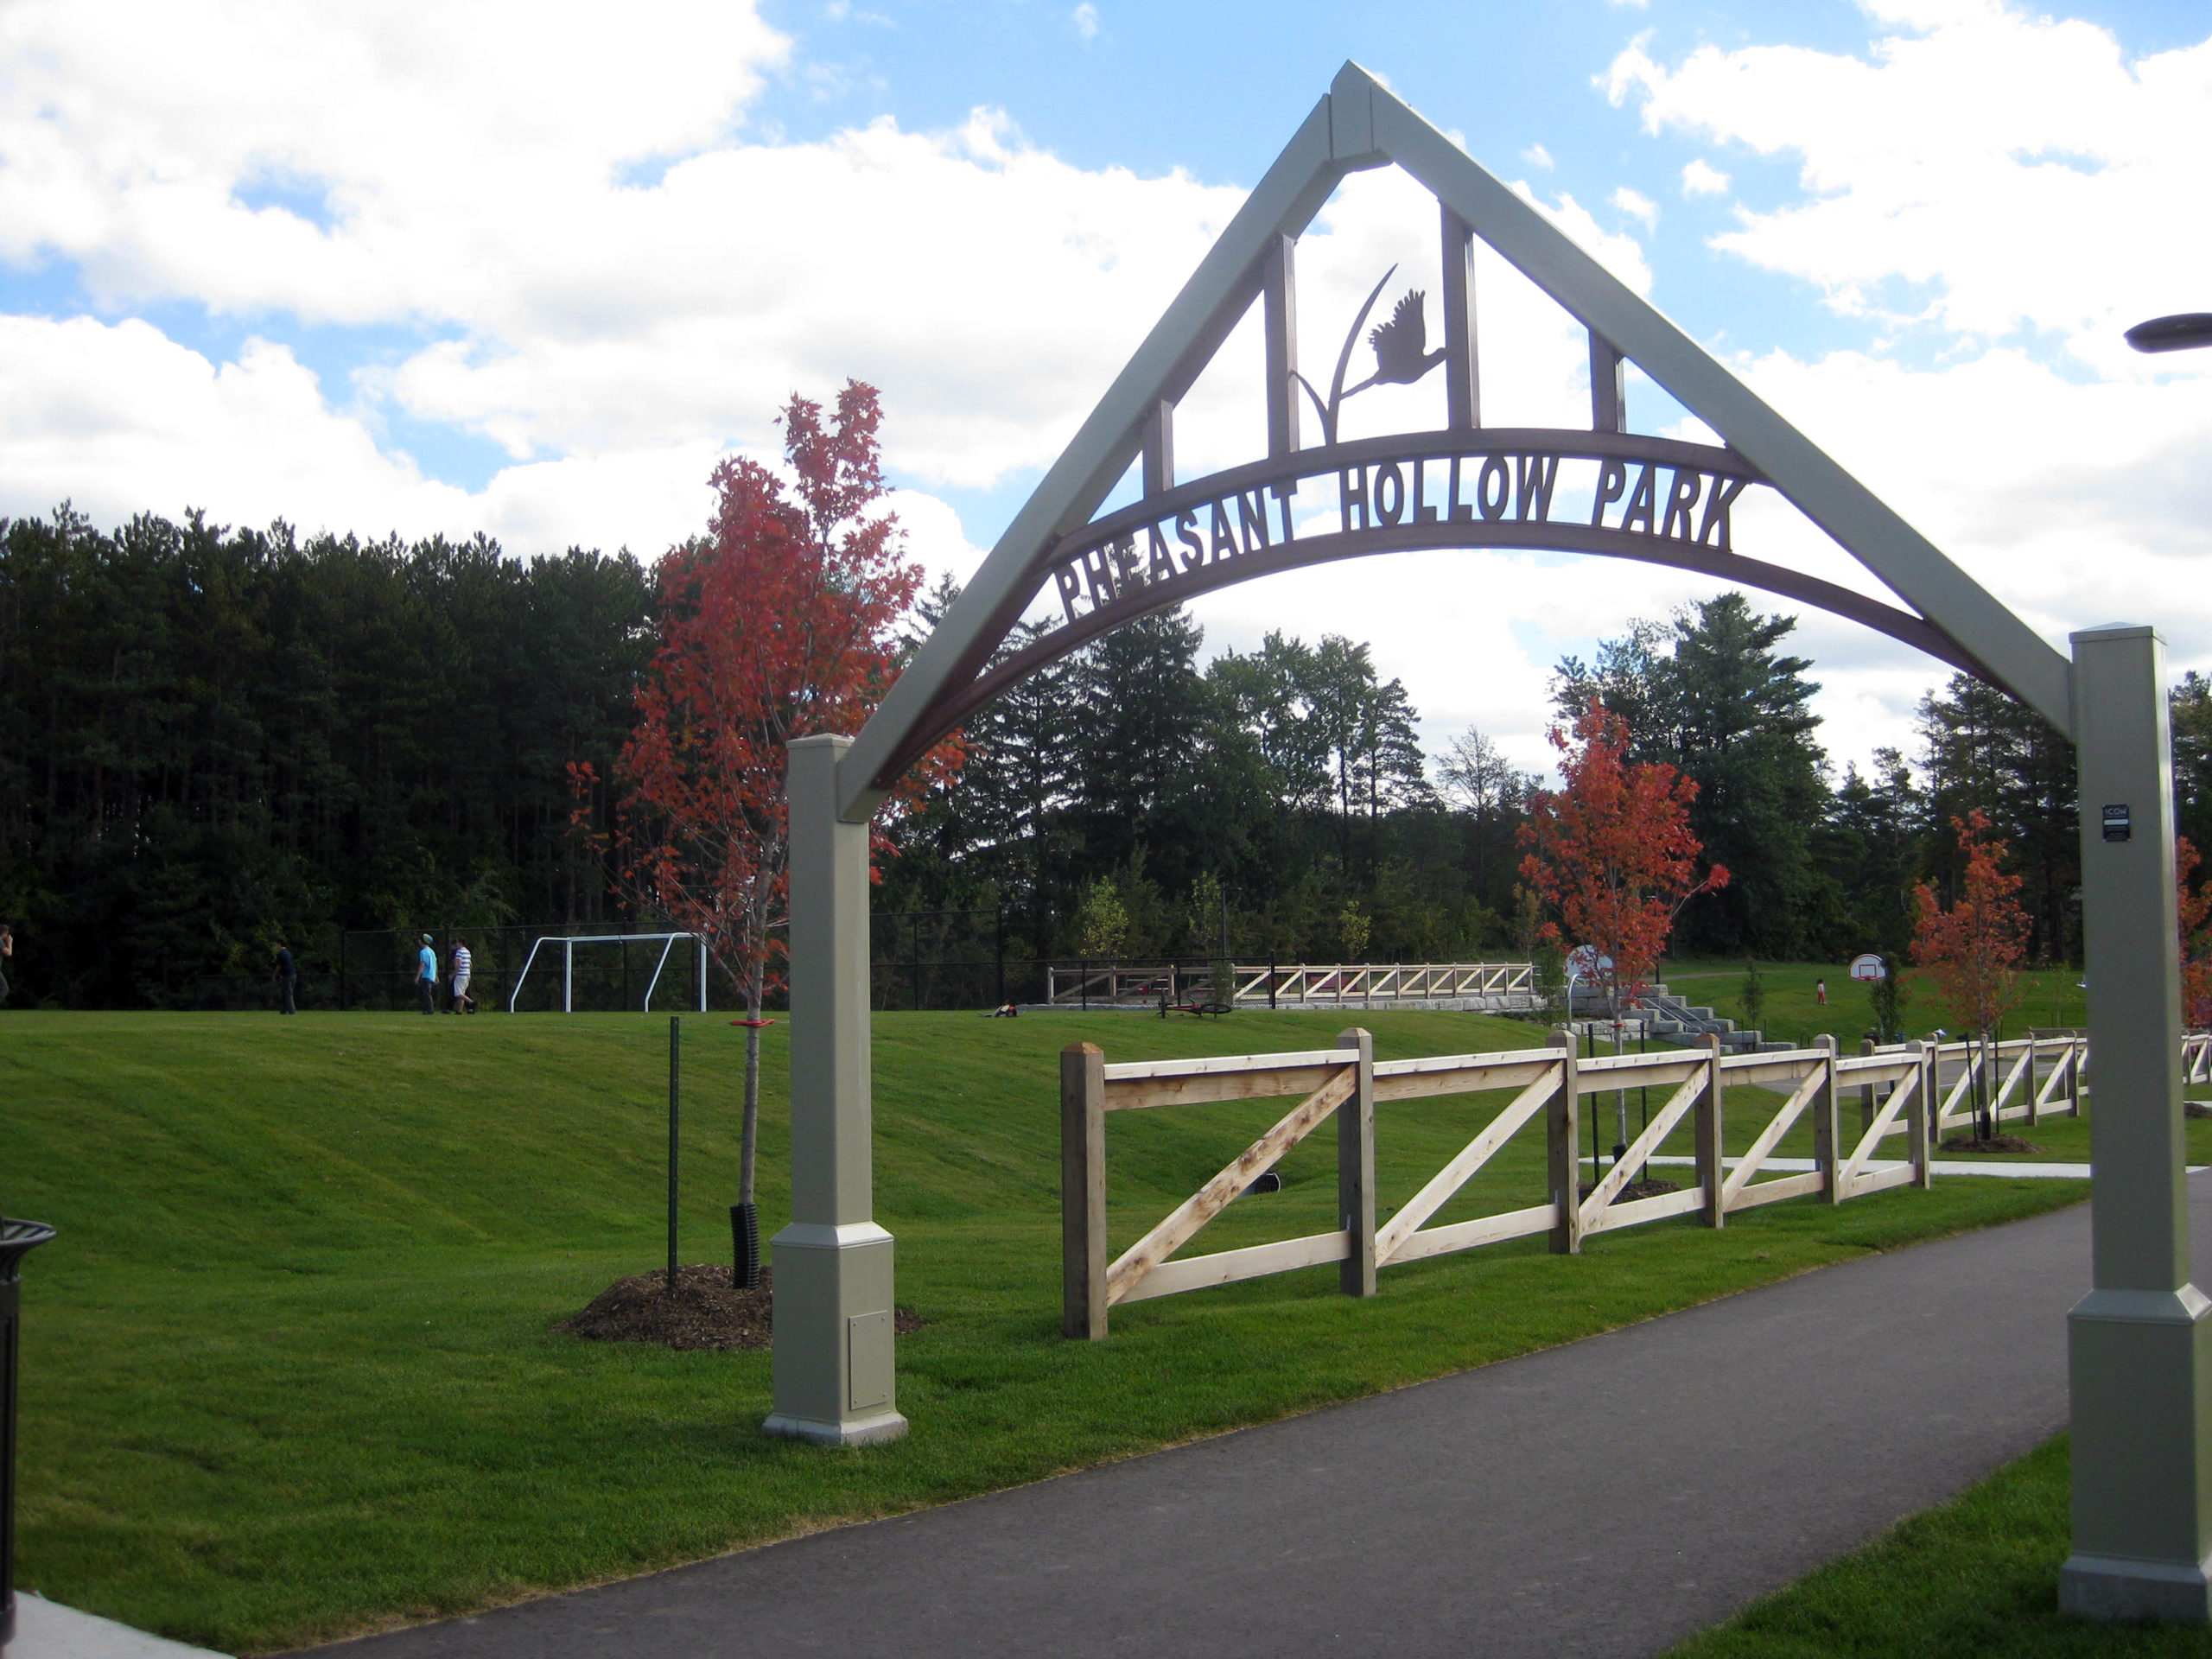 Entrance to the park.